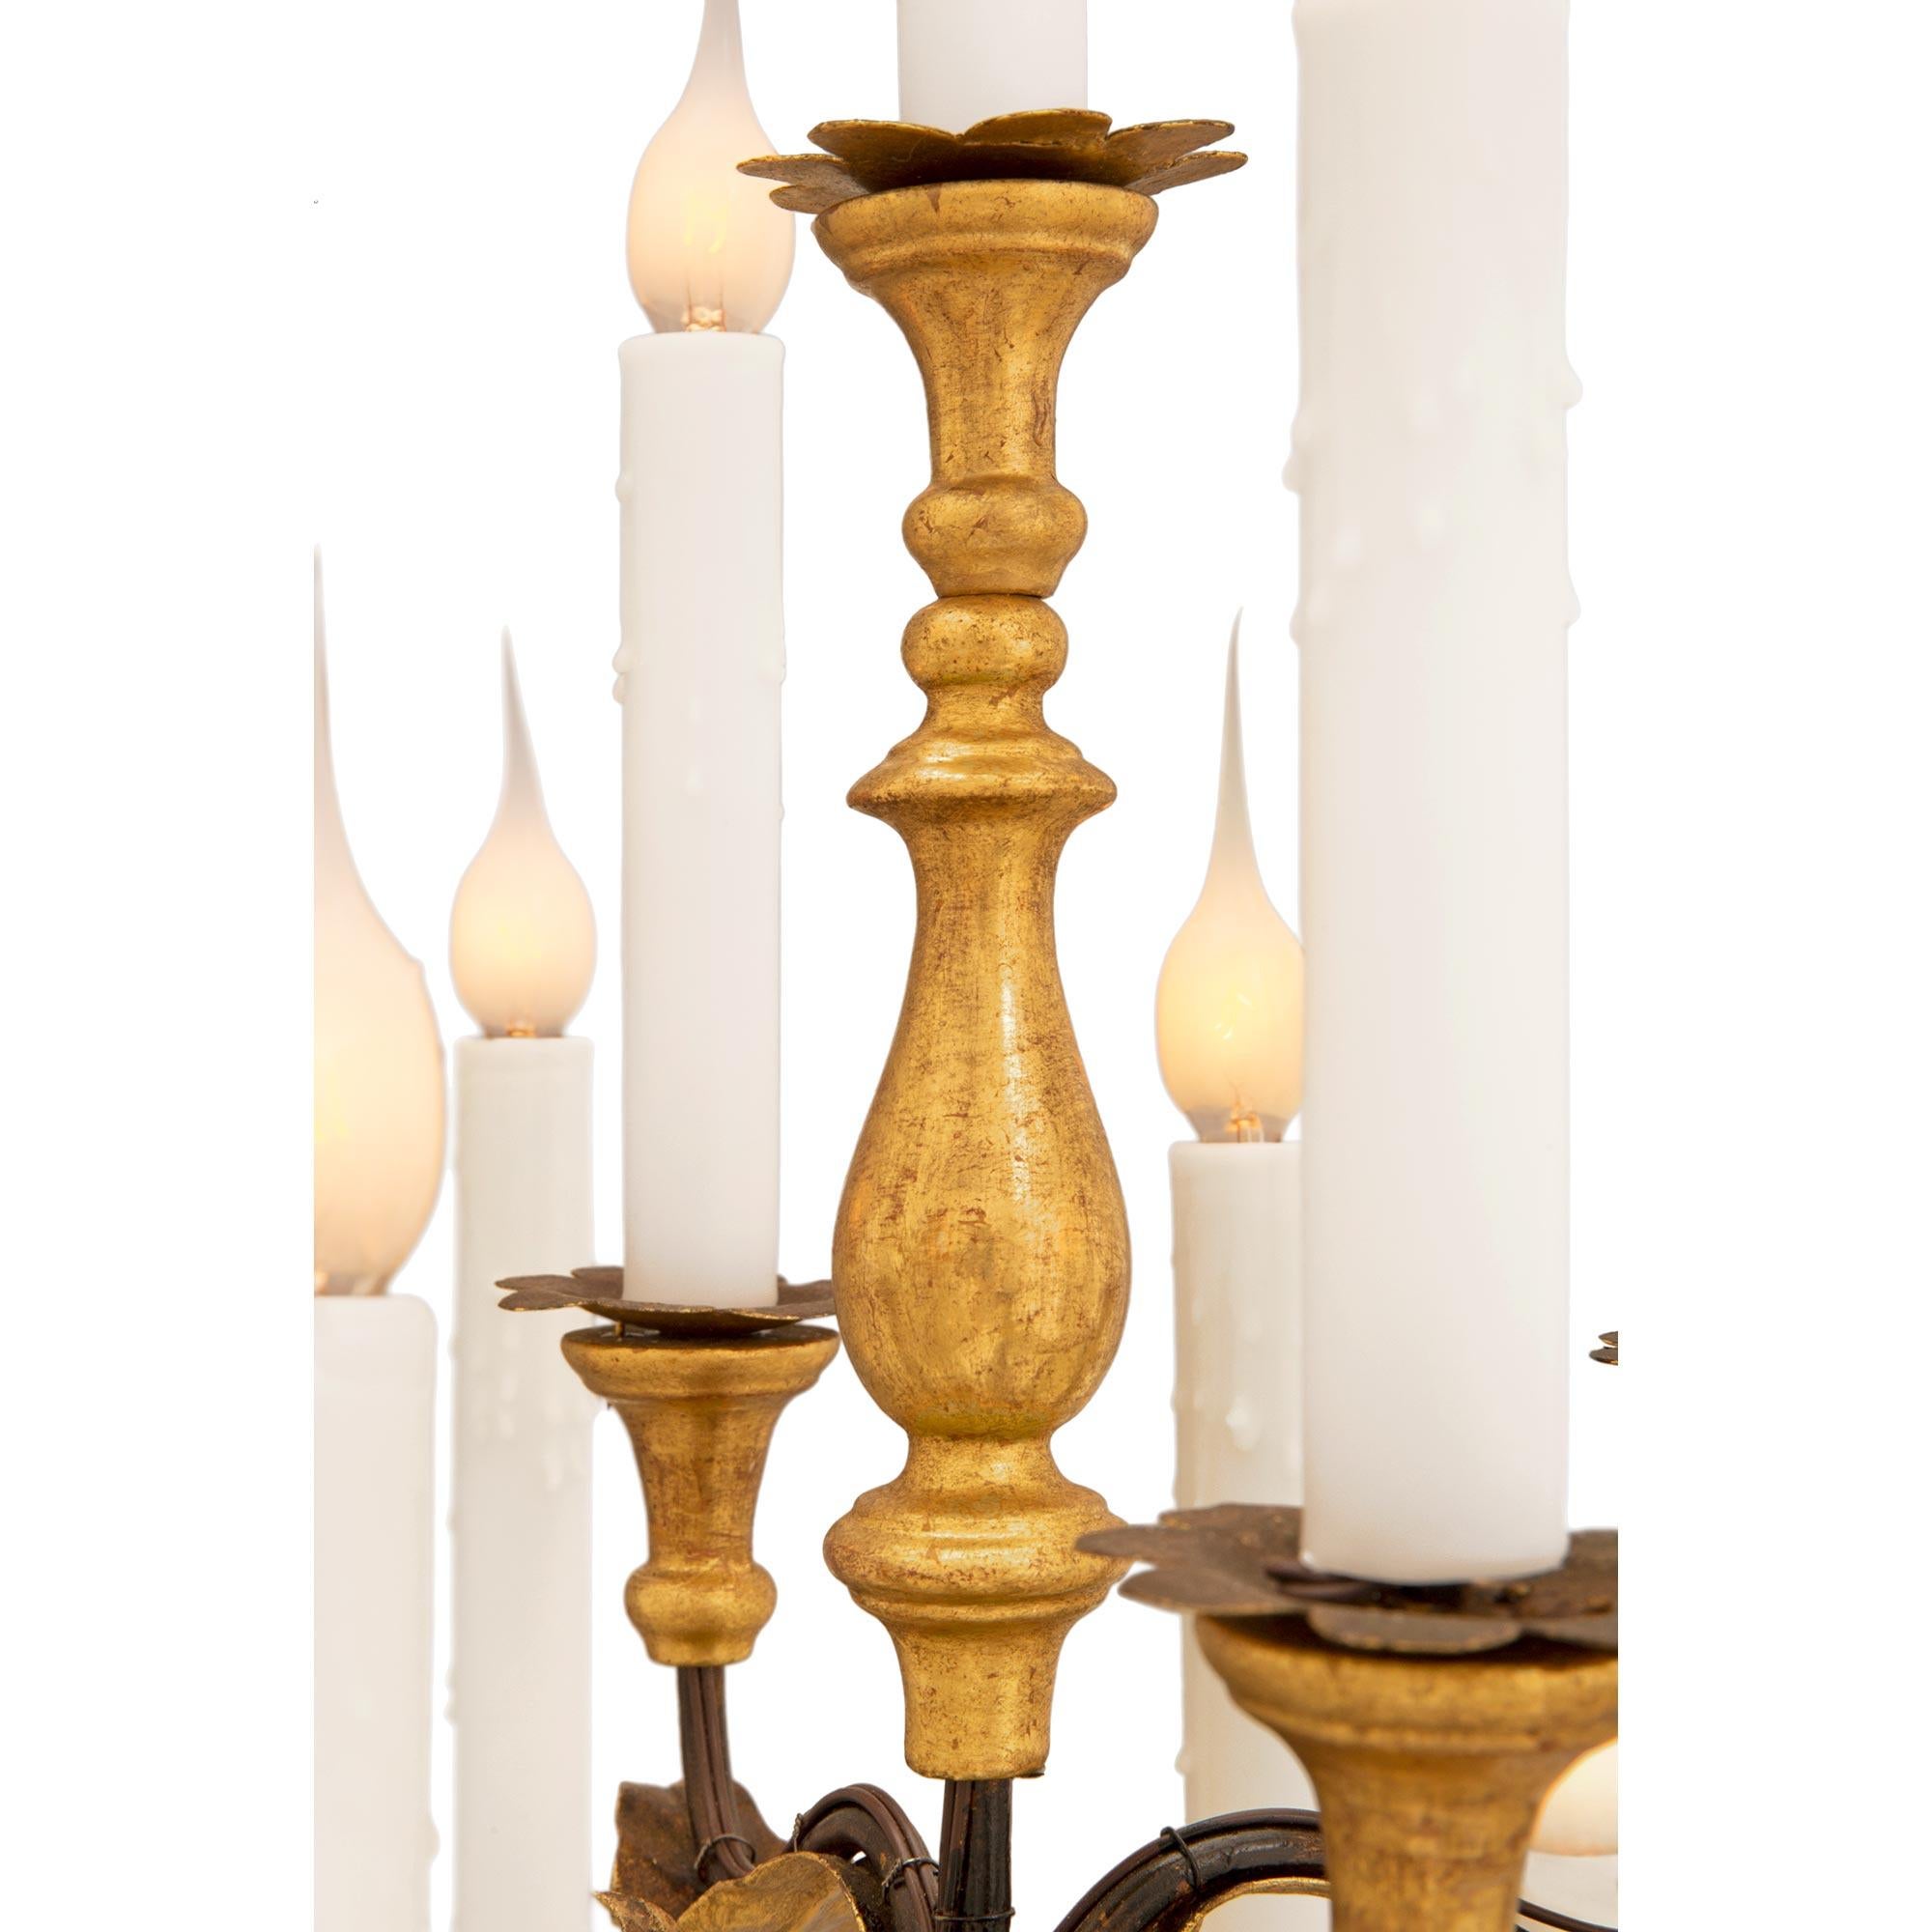 Pair of Italian 18th Century Baroque St. Wrought Iron Candelabra Lamps In Good Condition For Sale In West Palm Beach, FL